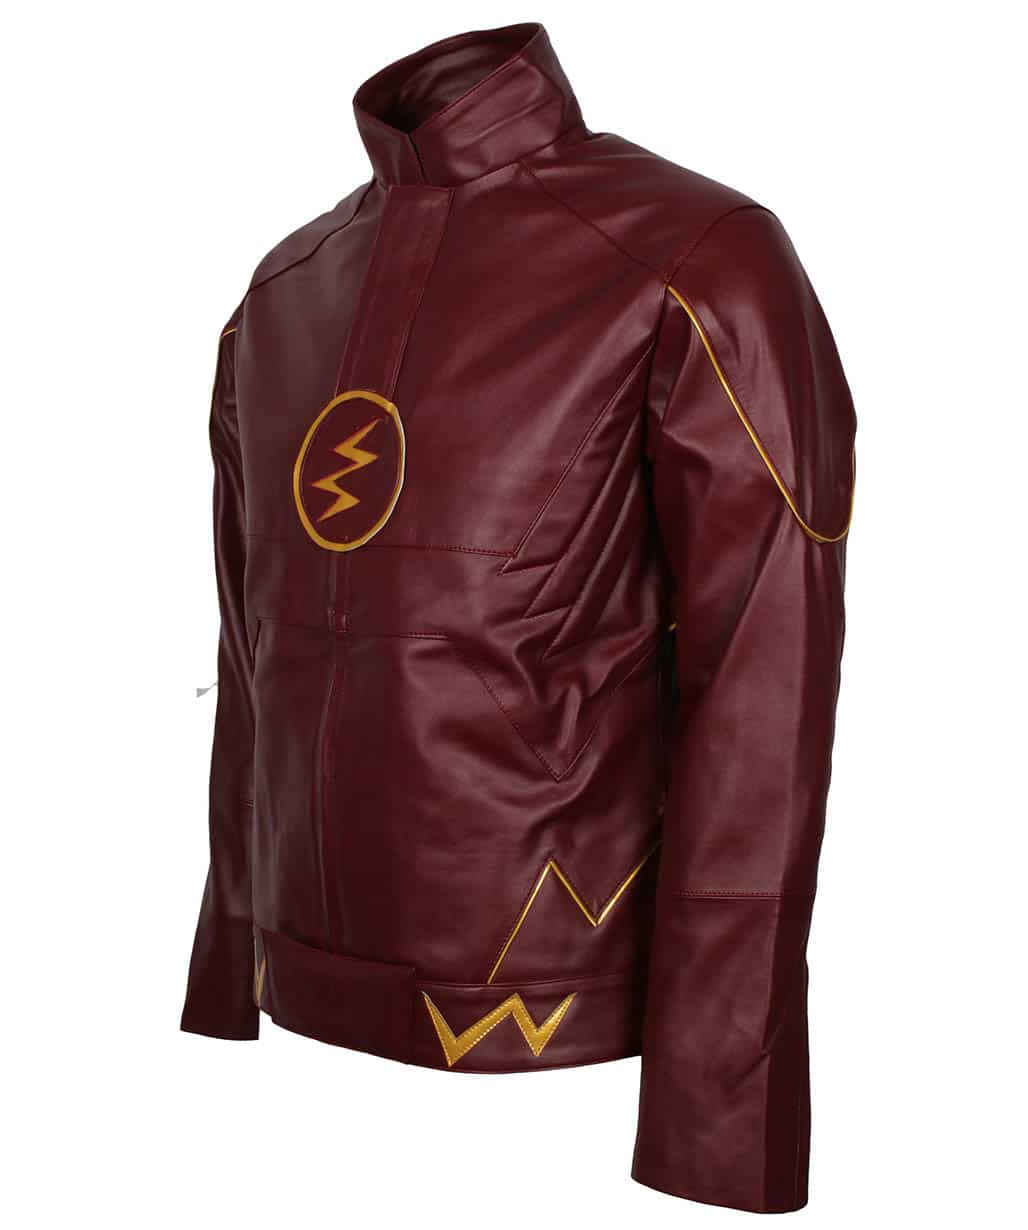 the-flash-barry-allen-grant-gustin-red-jacket-sale